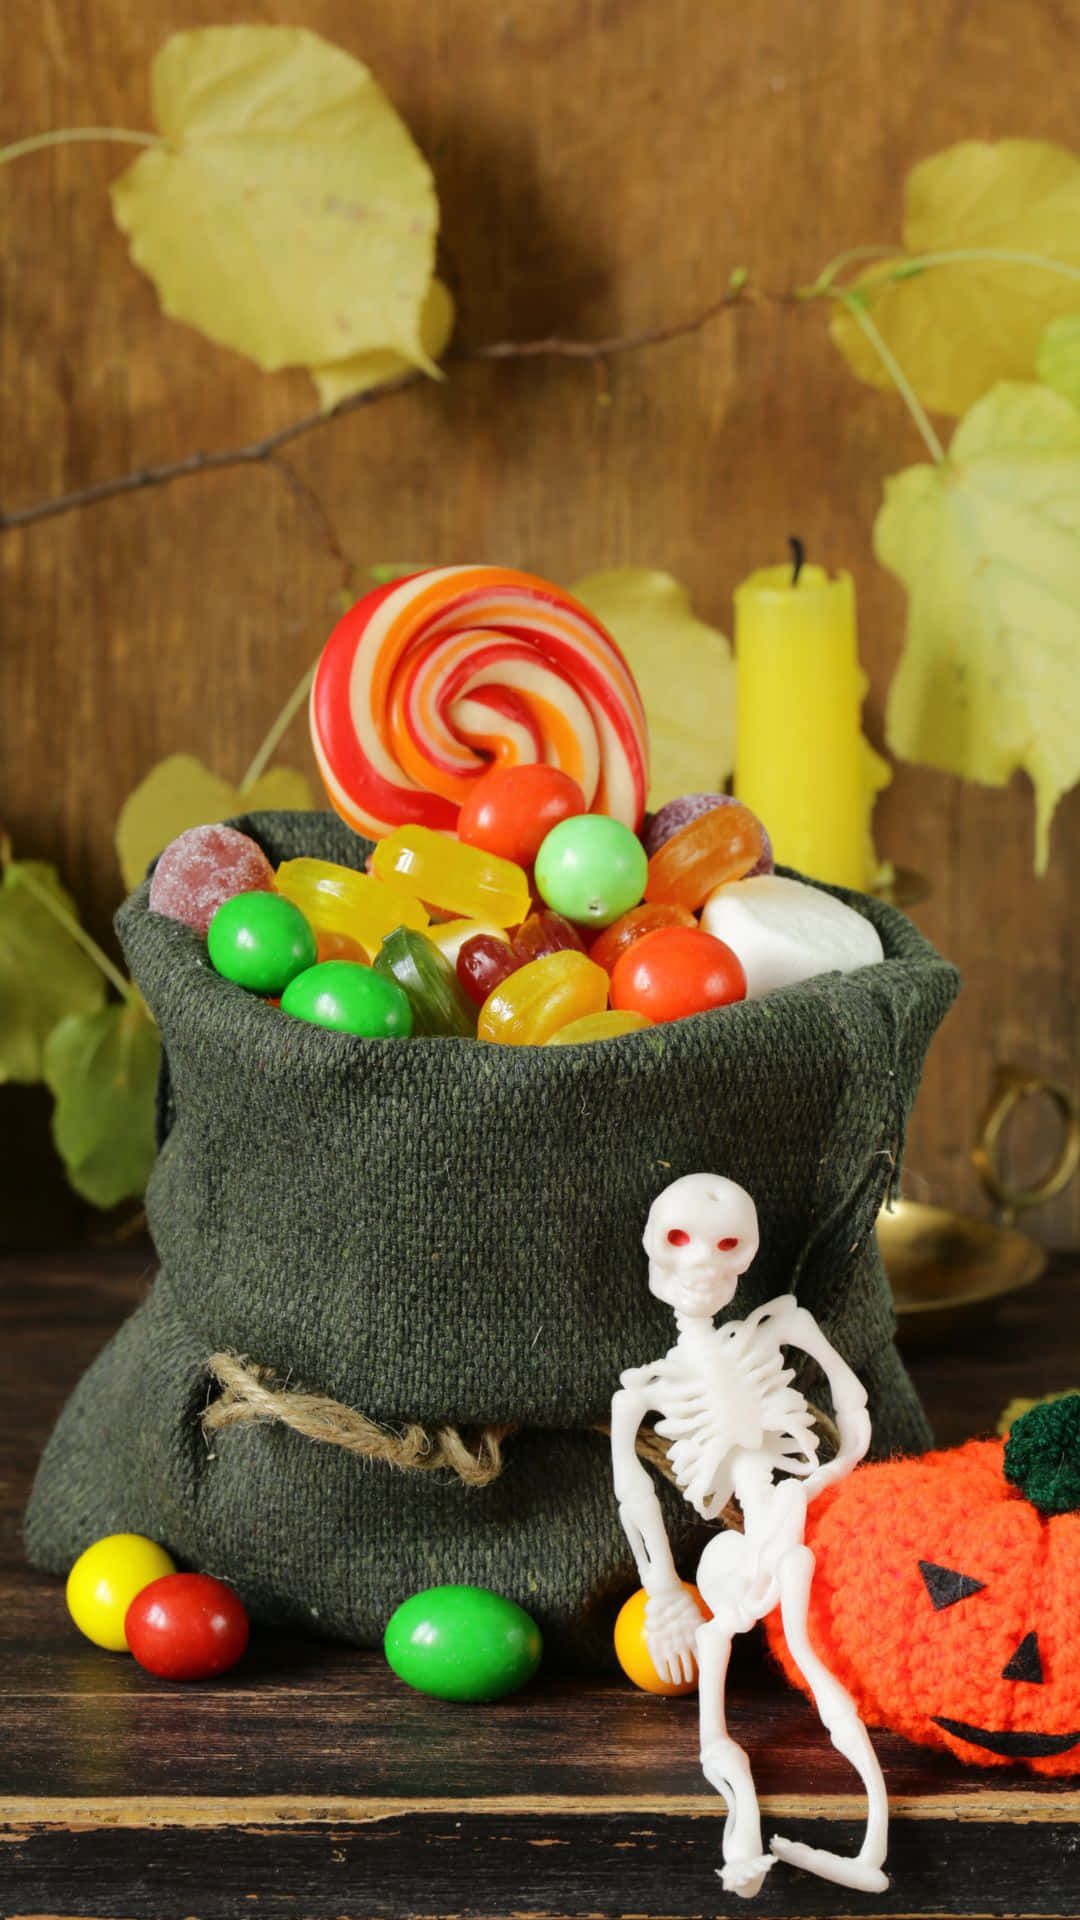 Get ready for a spooktacular night of trick-or-treating with these creative and colorful treat bags! Wallpaper